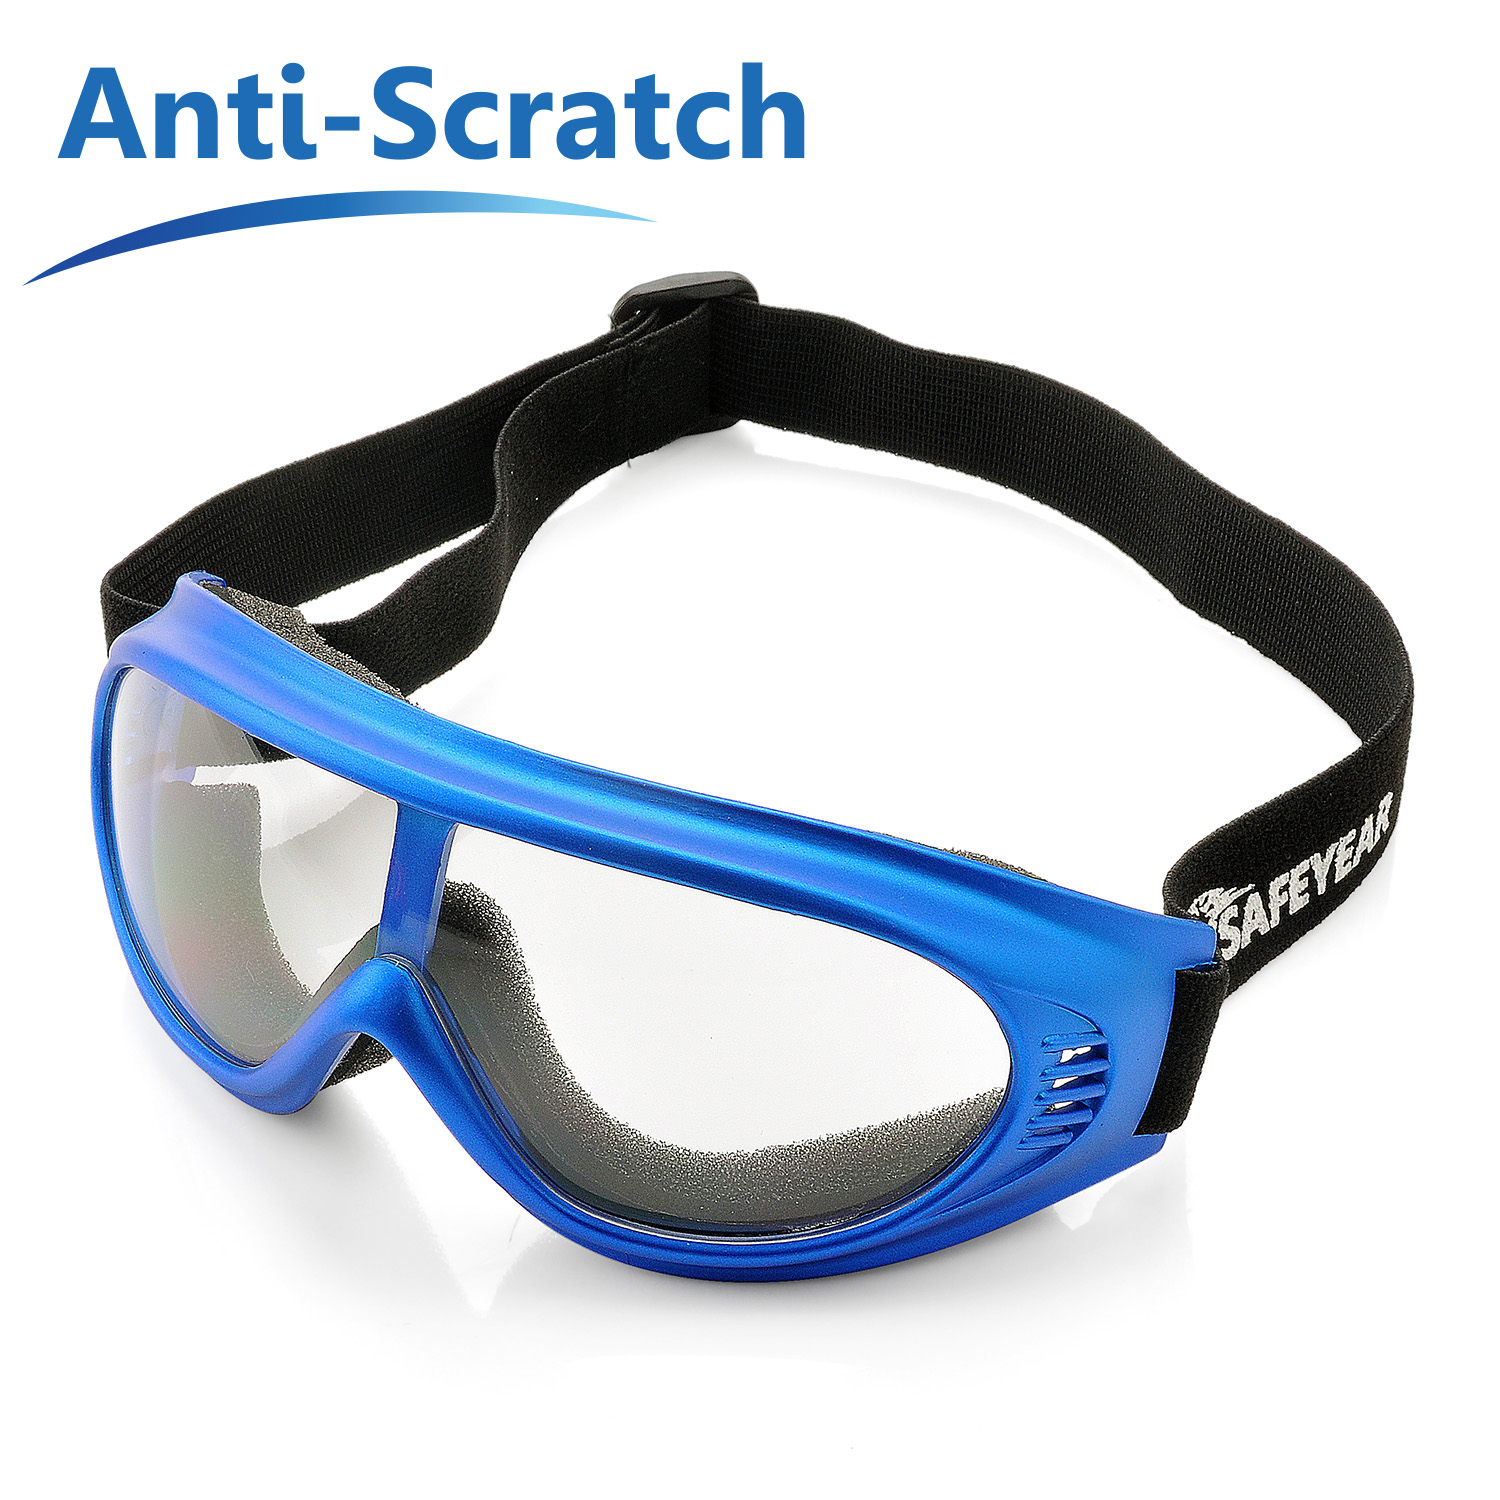 High Quality Safety Goggles SG020 Blue